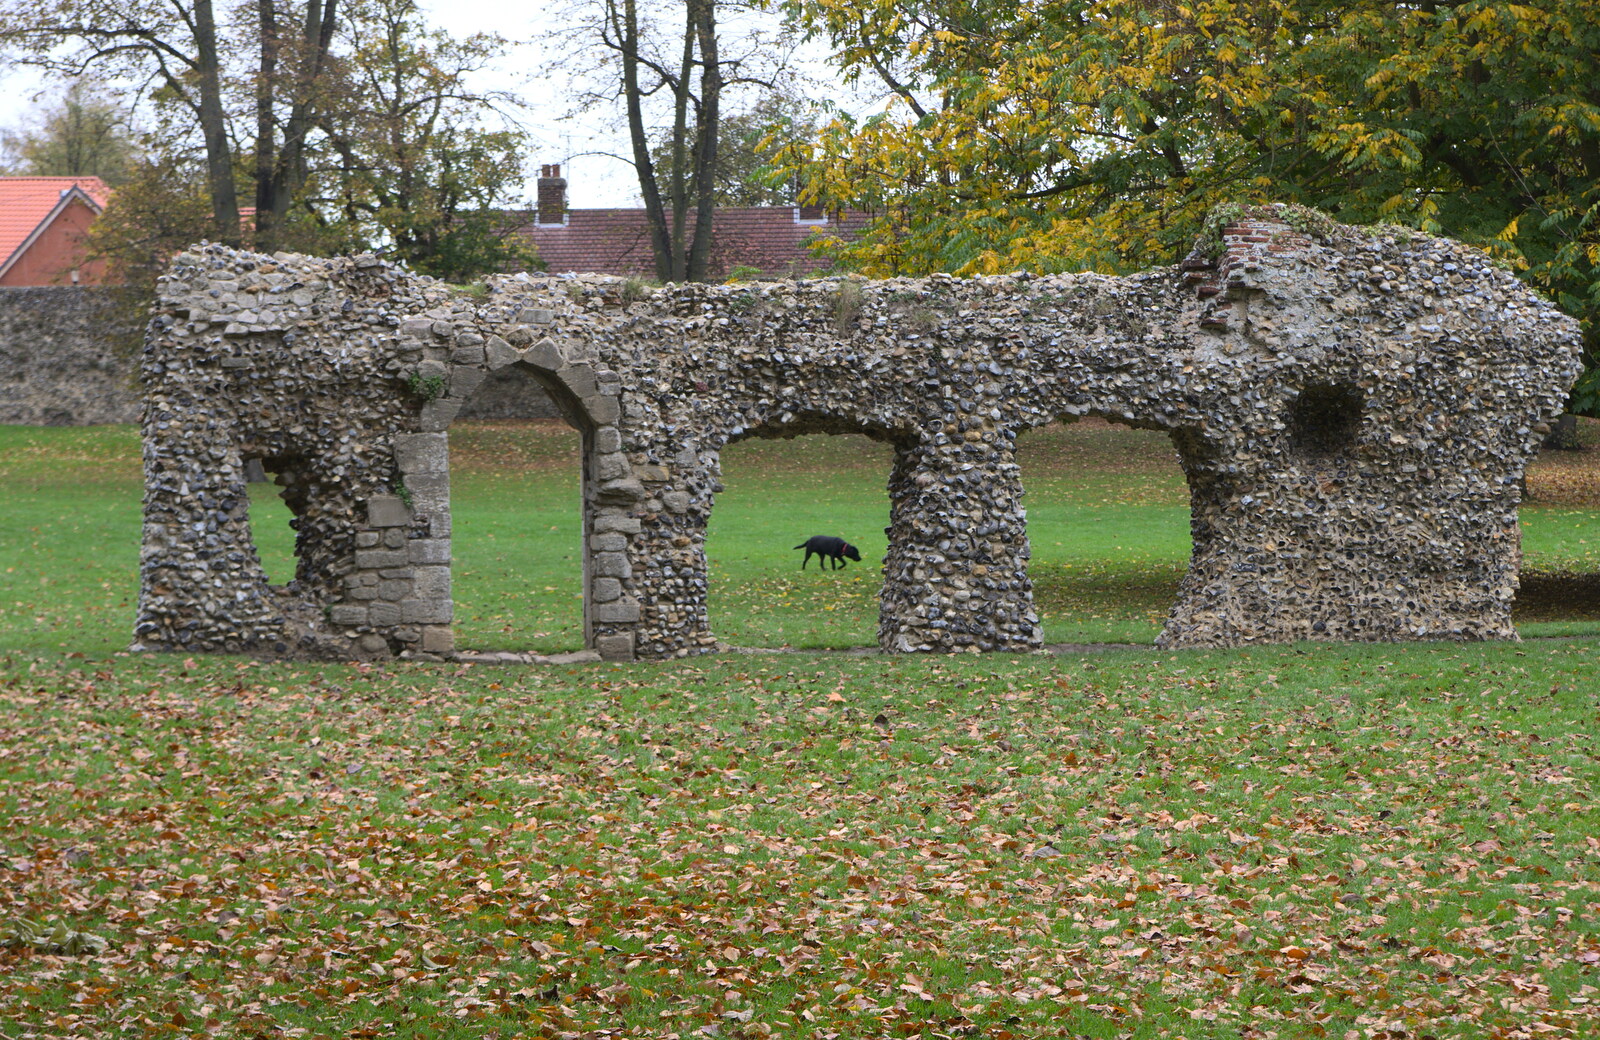 A dog roams around the ruins from A Trip to Abbey Gardens, Bury St. Edmunds, Suffolk - 29th October 2014